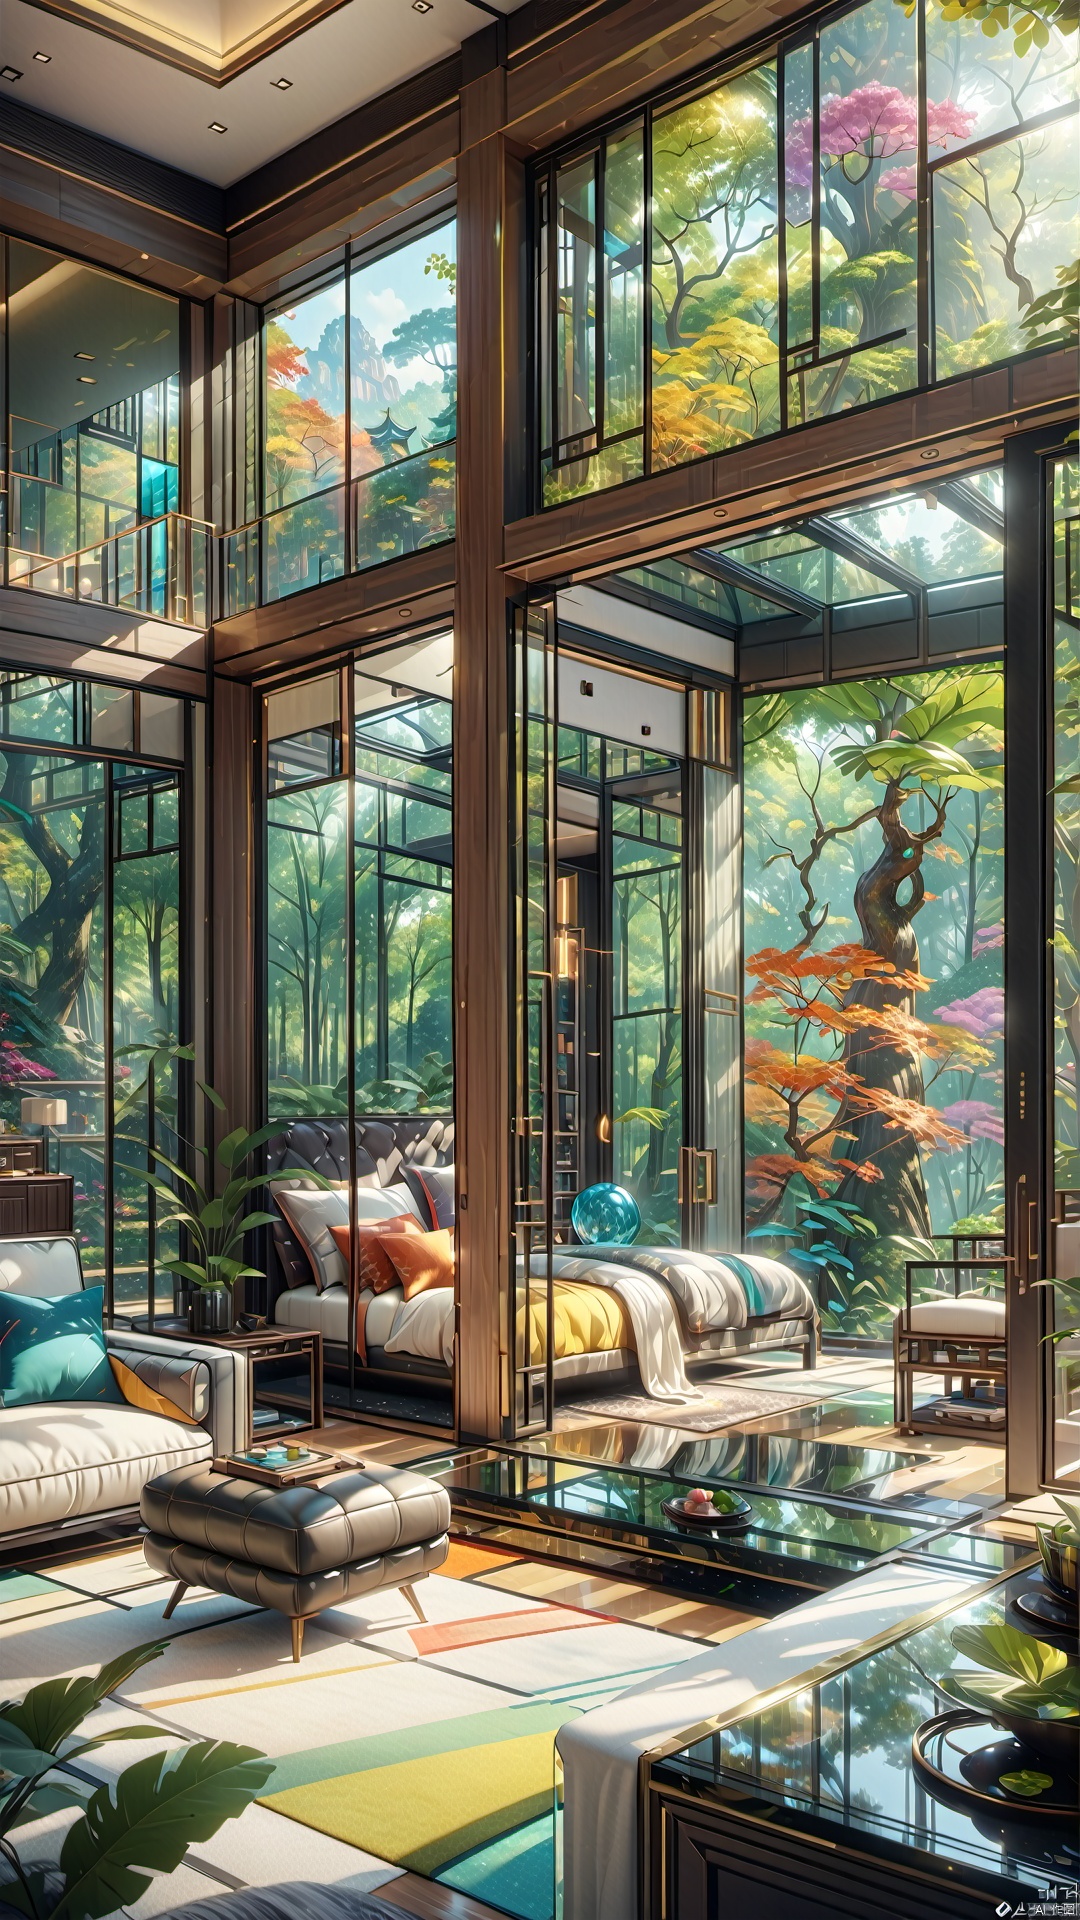 Glass room, colorful colors, forest view, depth of field filter, 
render,technology, (best quality) (masterpiece), (highly in detailed), 4K,Official art, unit 8 k wallpaper, ultra detailed, masterpiece, best quality, extremely detailed,CG,low saturation, jianzhu, Villa, QMSJ